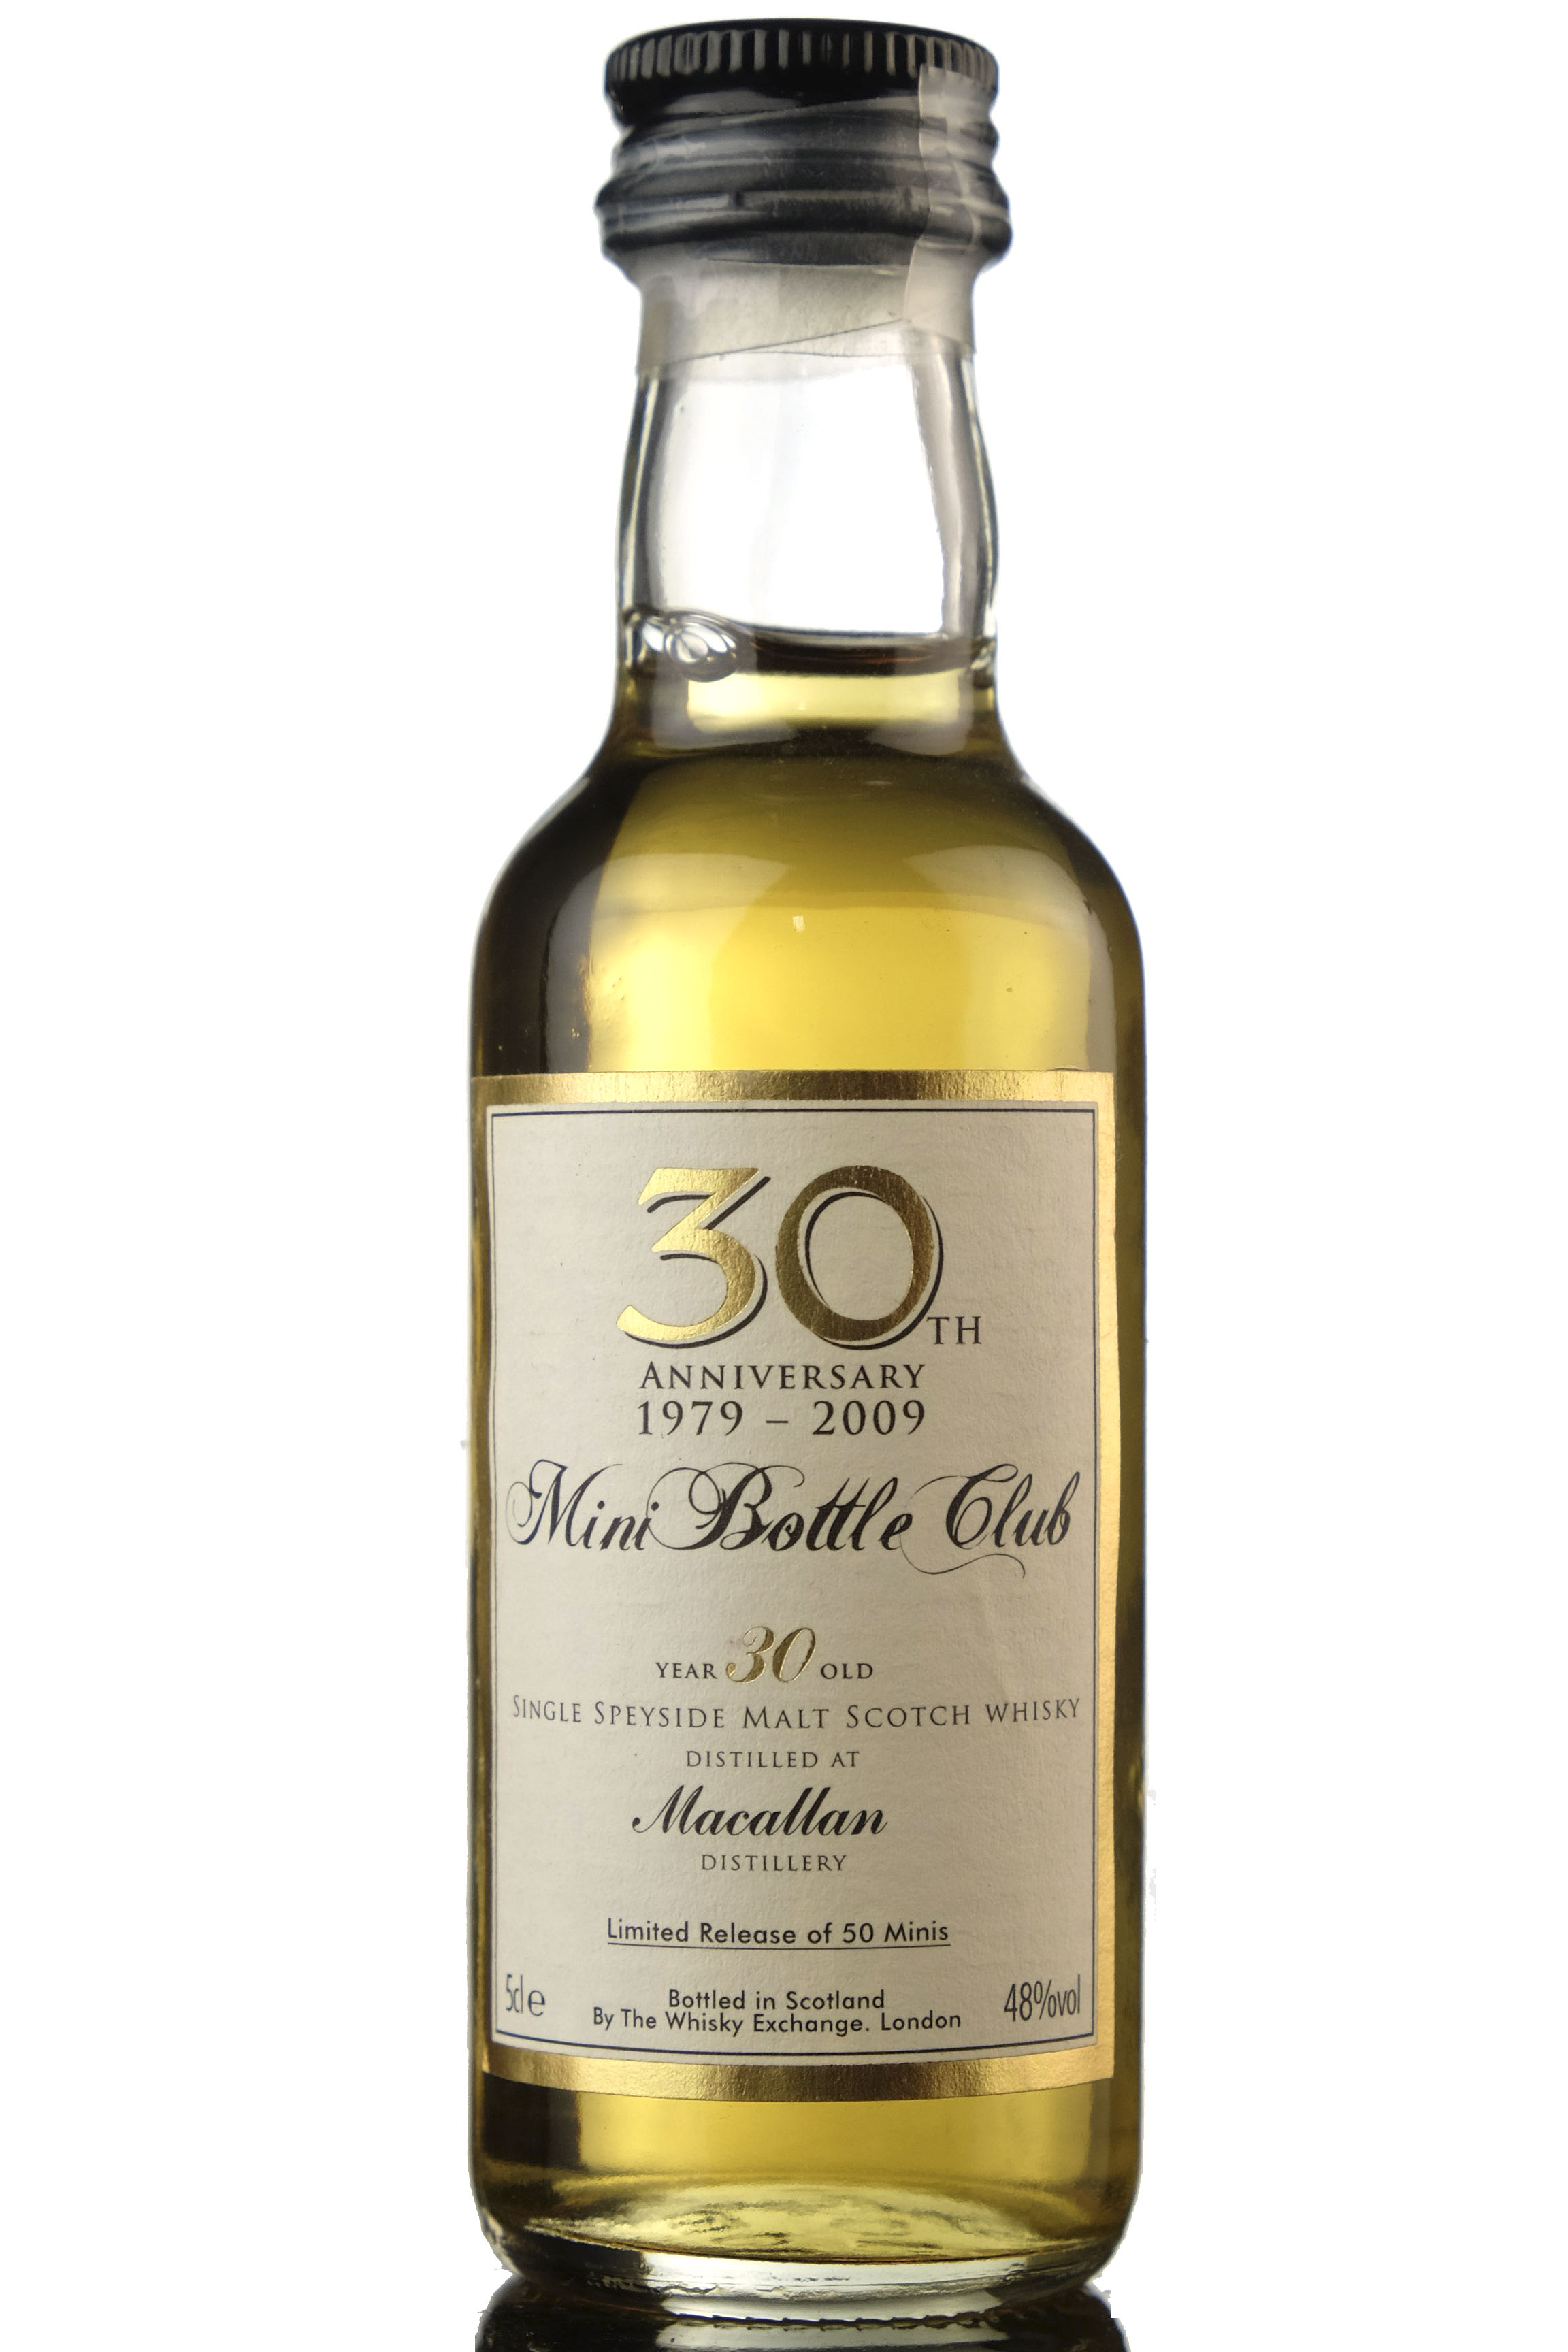 Macallan 30 Year Old - The 30th Anniversary Of The UK Mini Bottle Club